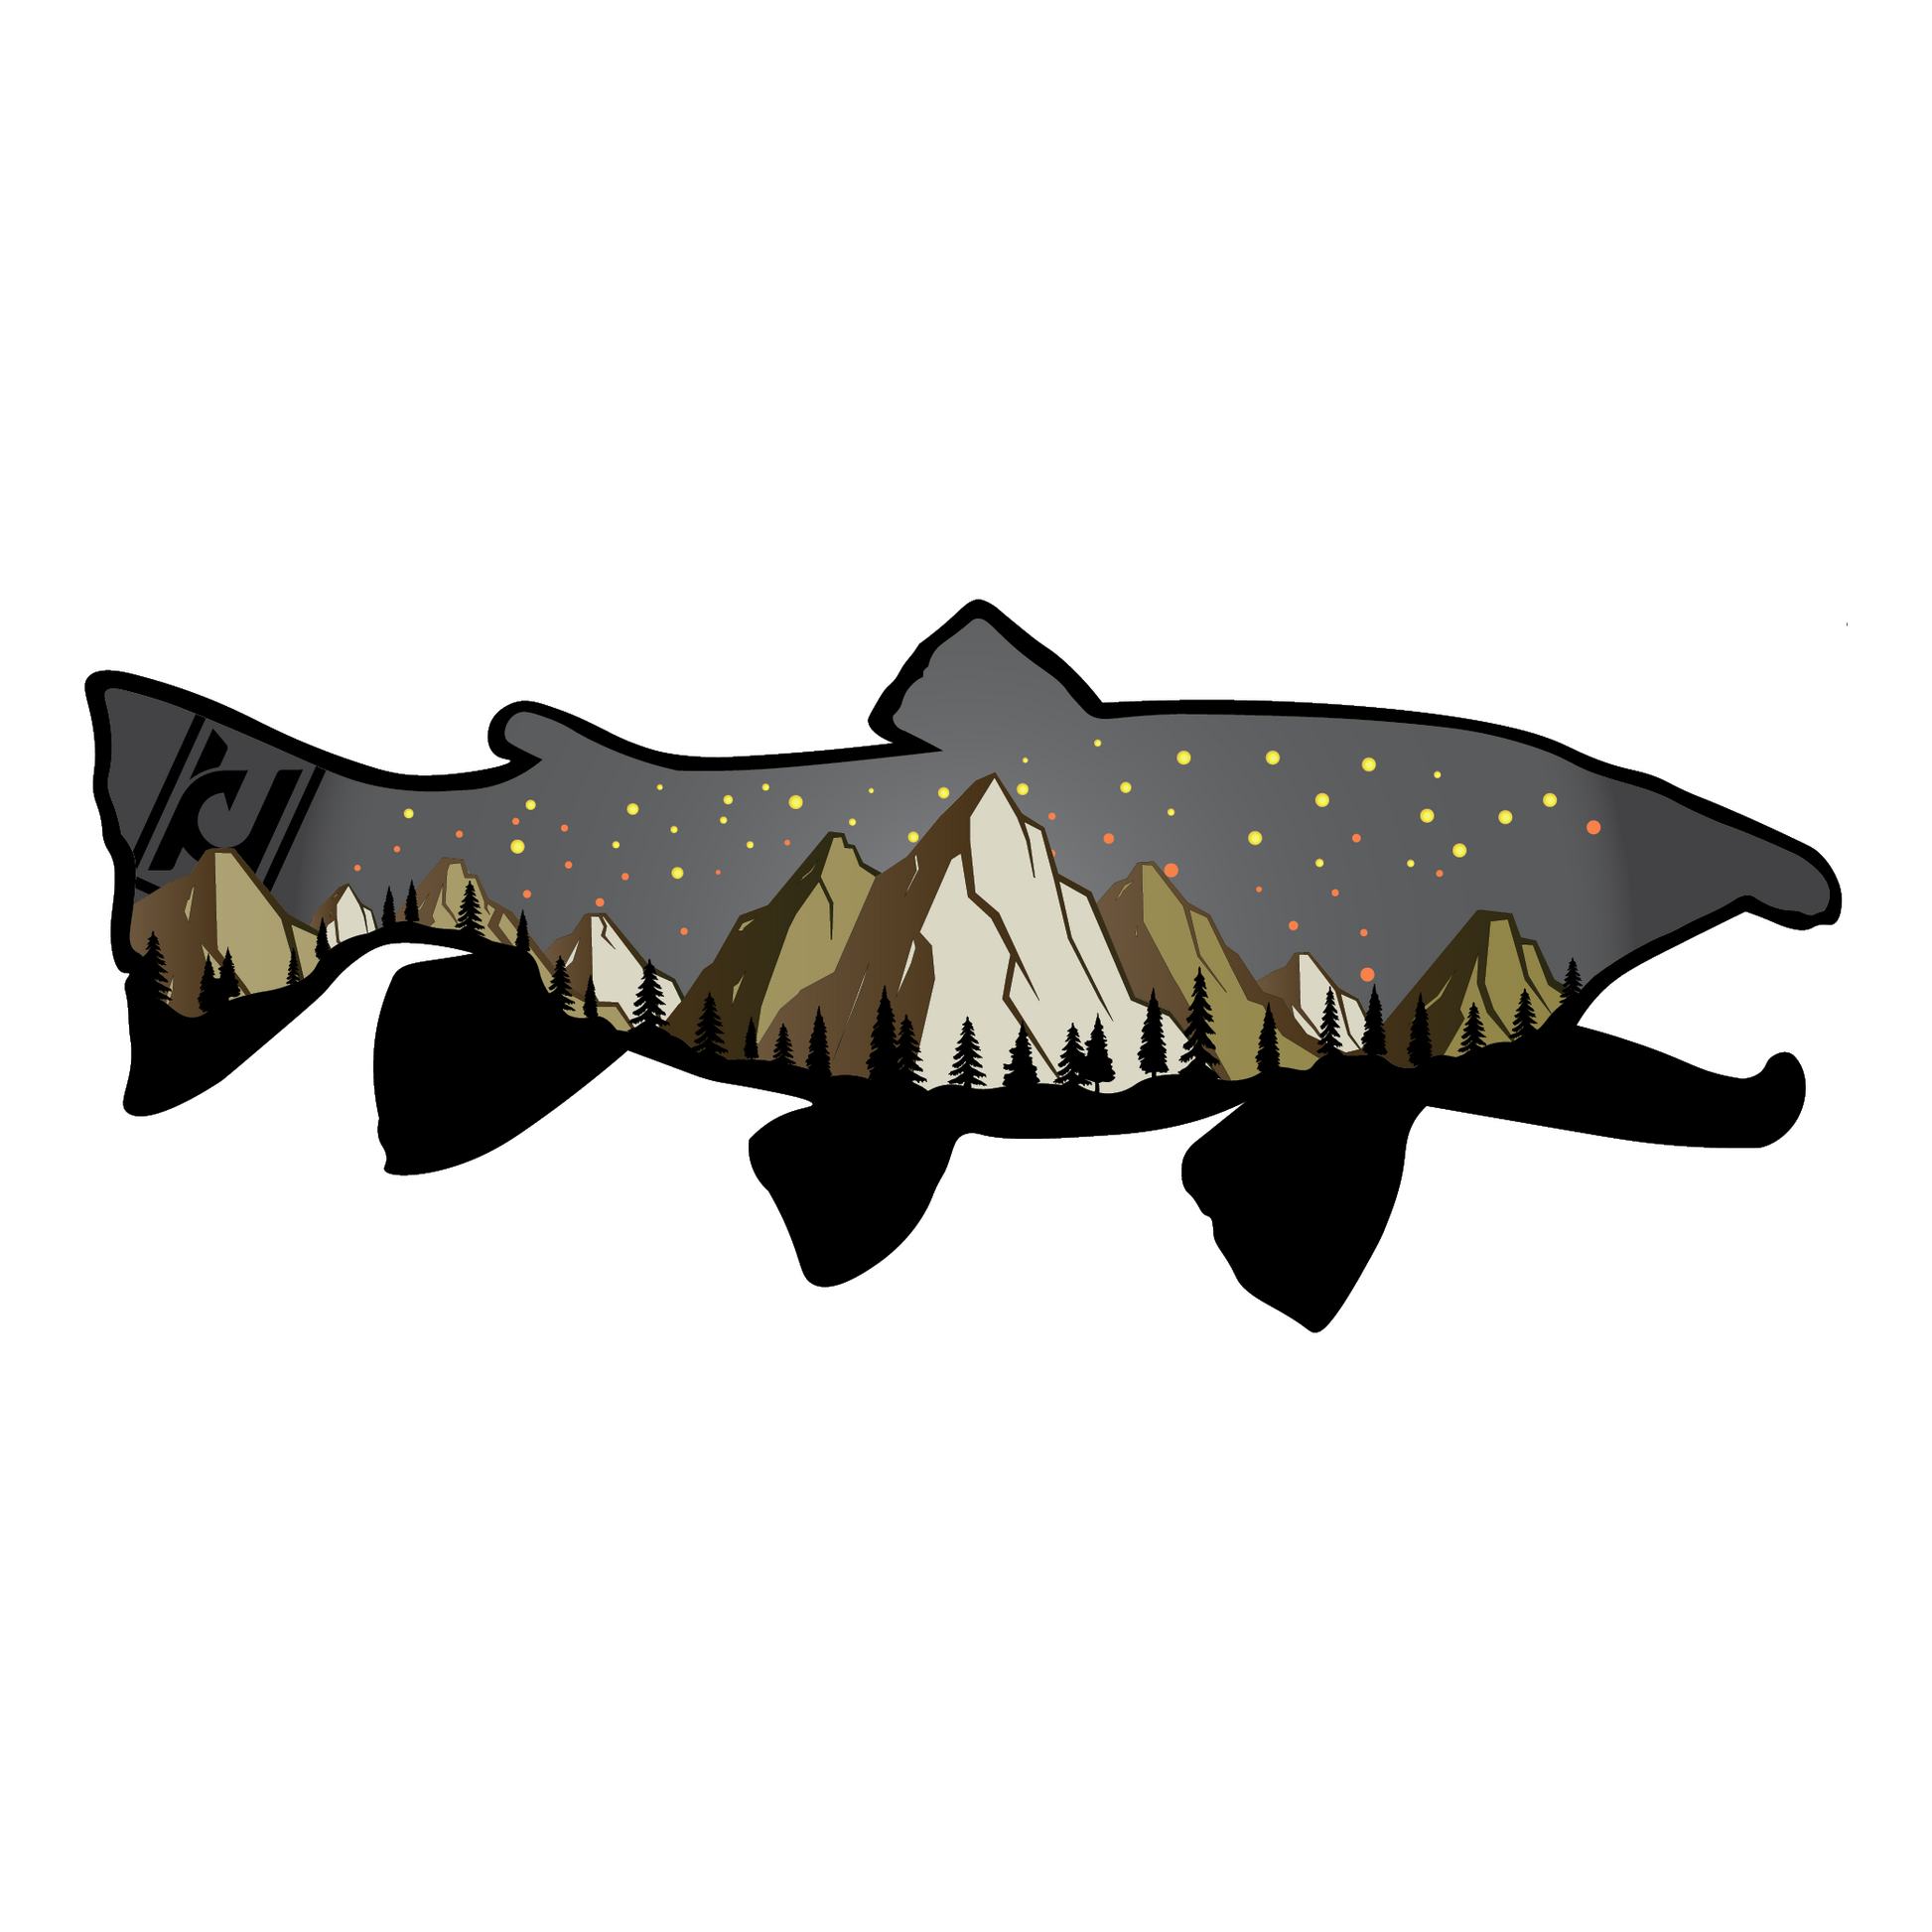 Bull Trout sticker modeled after our wood art! Includes the beautiful features of the Bull Trout along with mountain and pine tree accents.